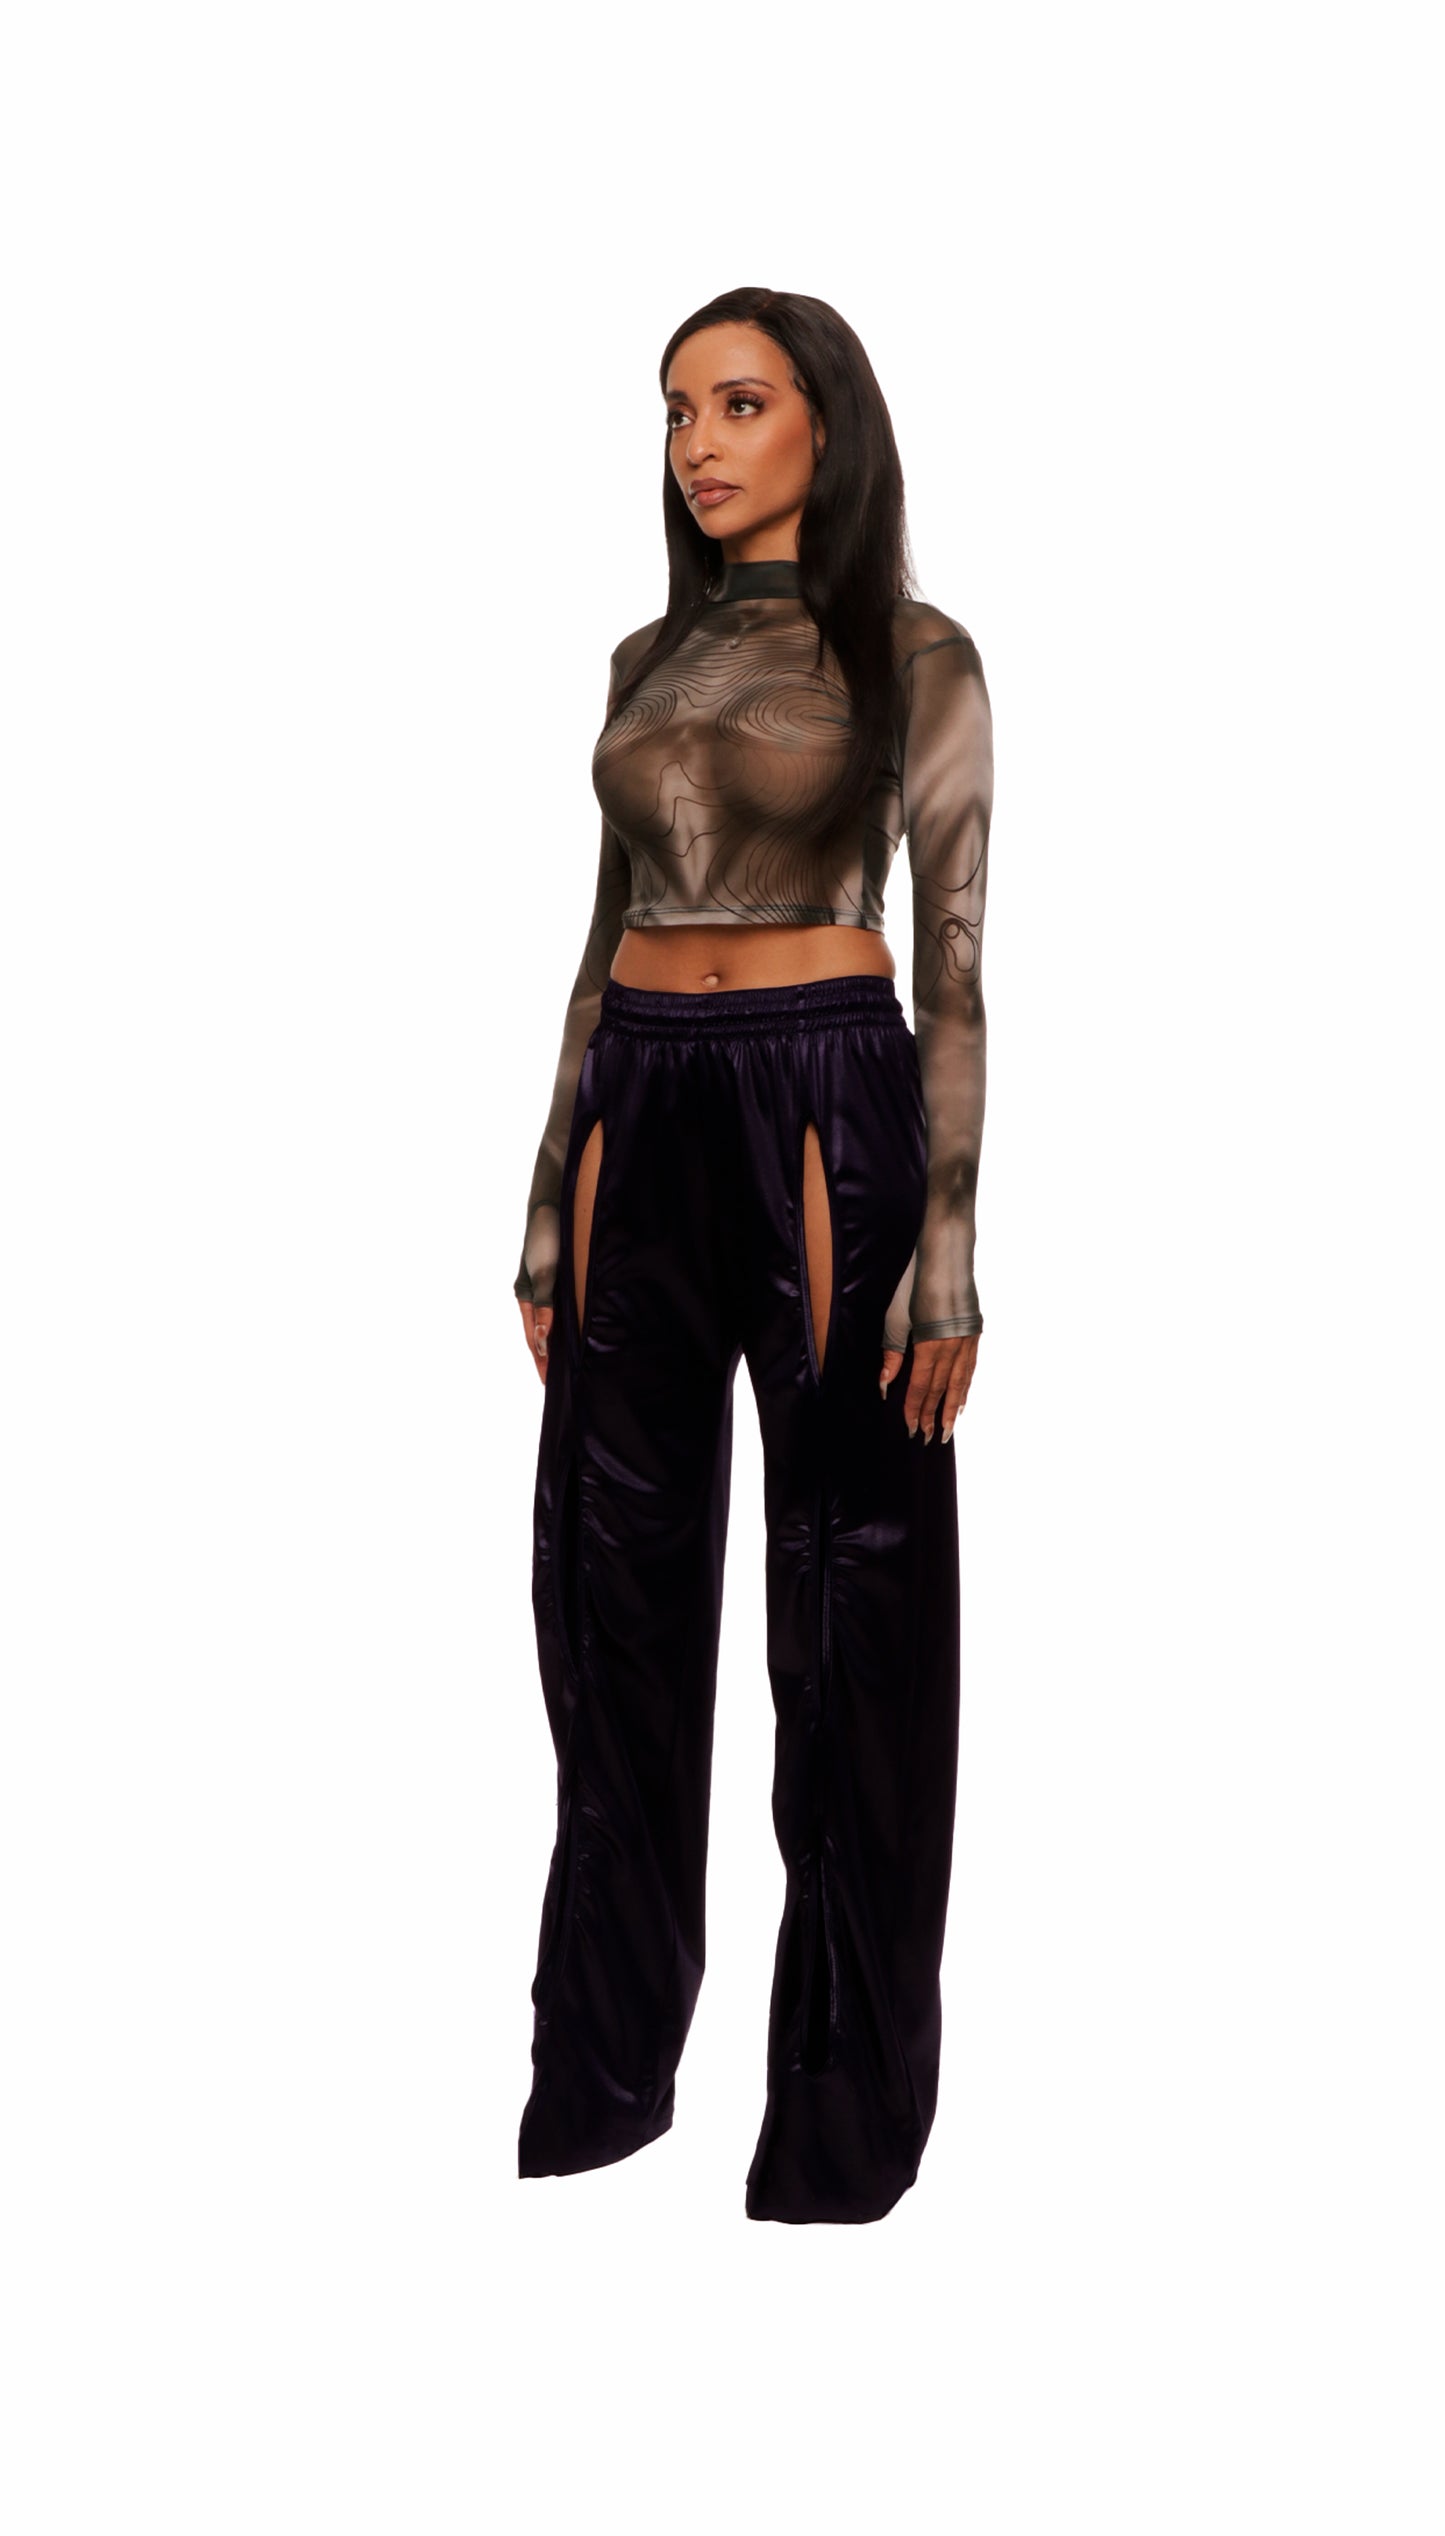 Woman who looks like Beyoncé or Aaliyah wears a grey stretch mesh long sleeve top custom printed to contour the body and resemble an oil spill. Side view paired with shiny purple pants.